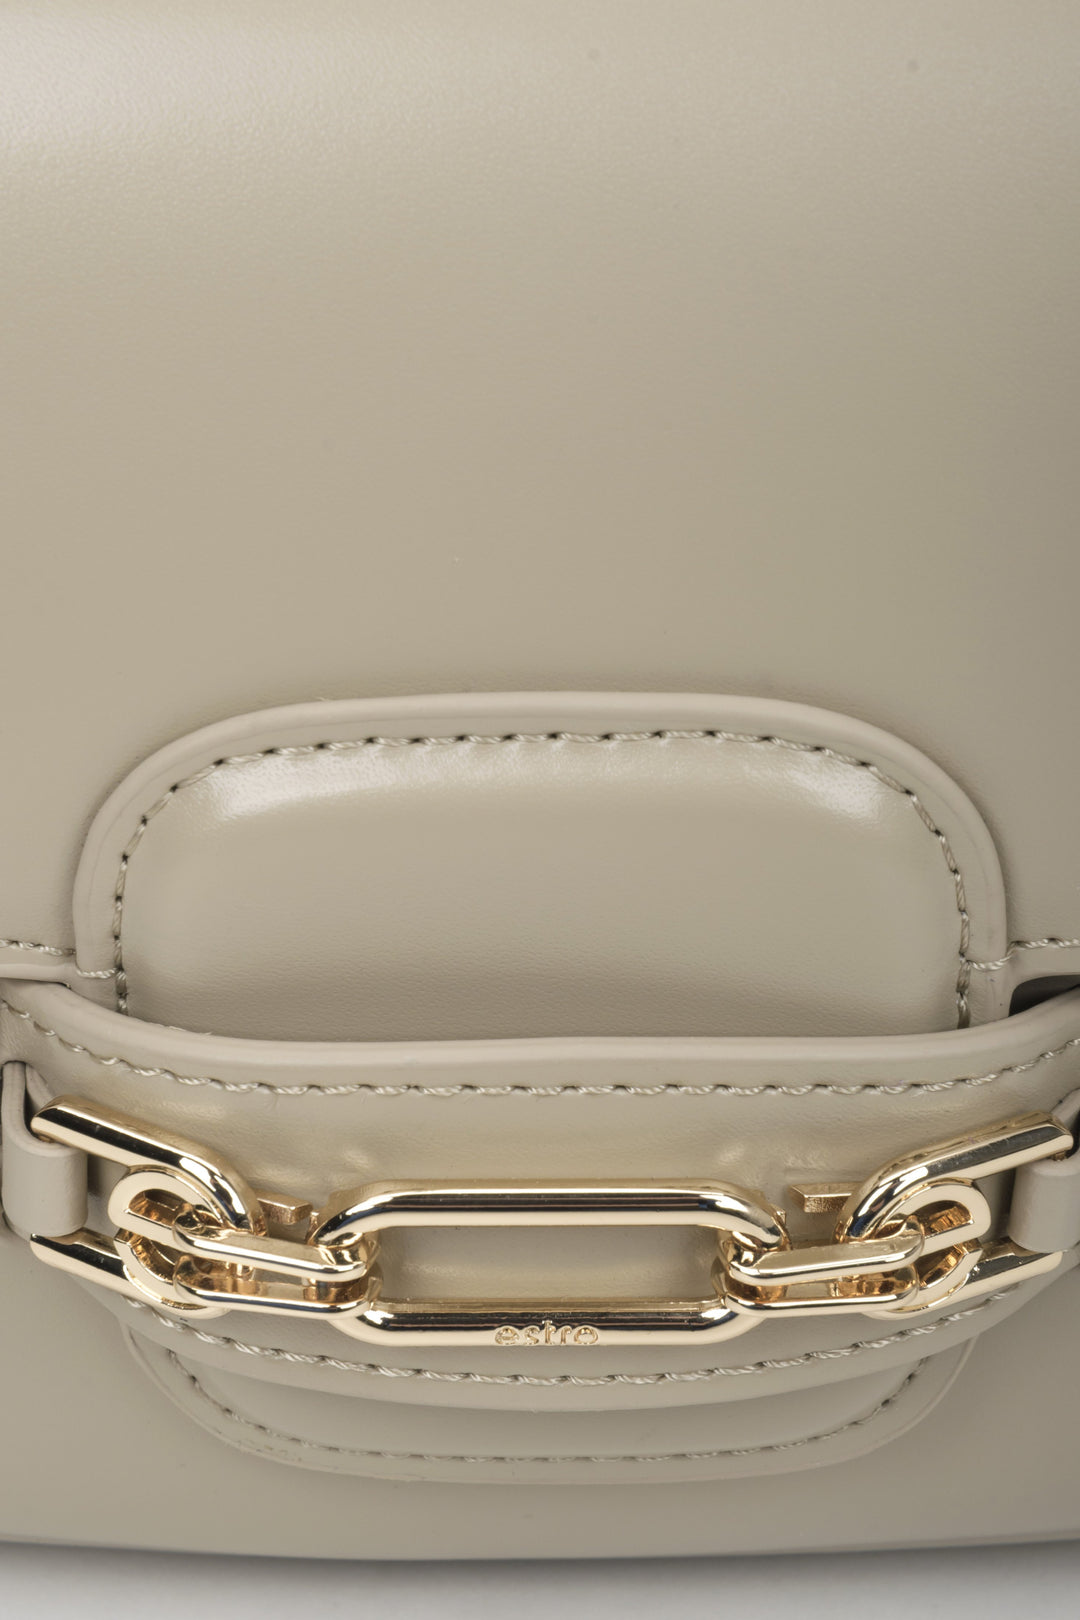 Women's grey and beige leather bag - close-up on the detail.